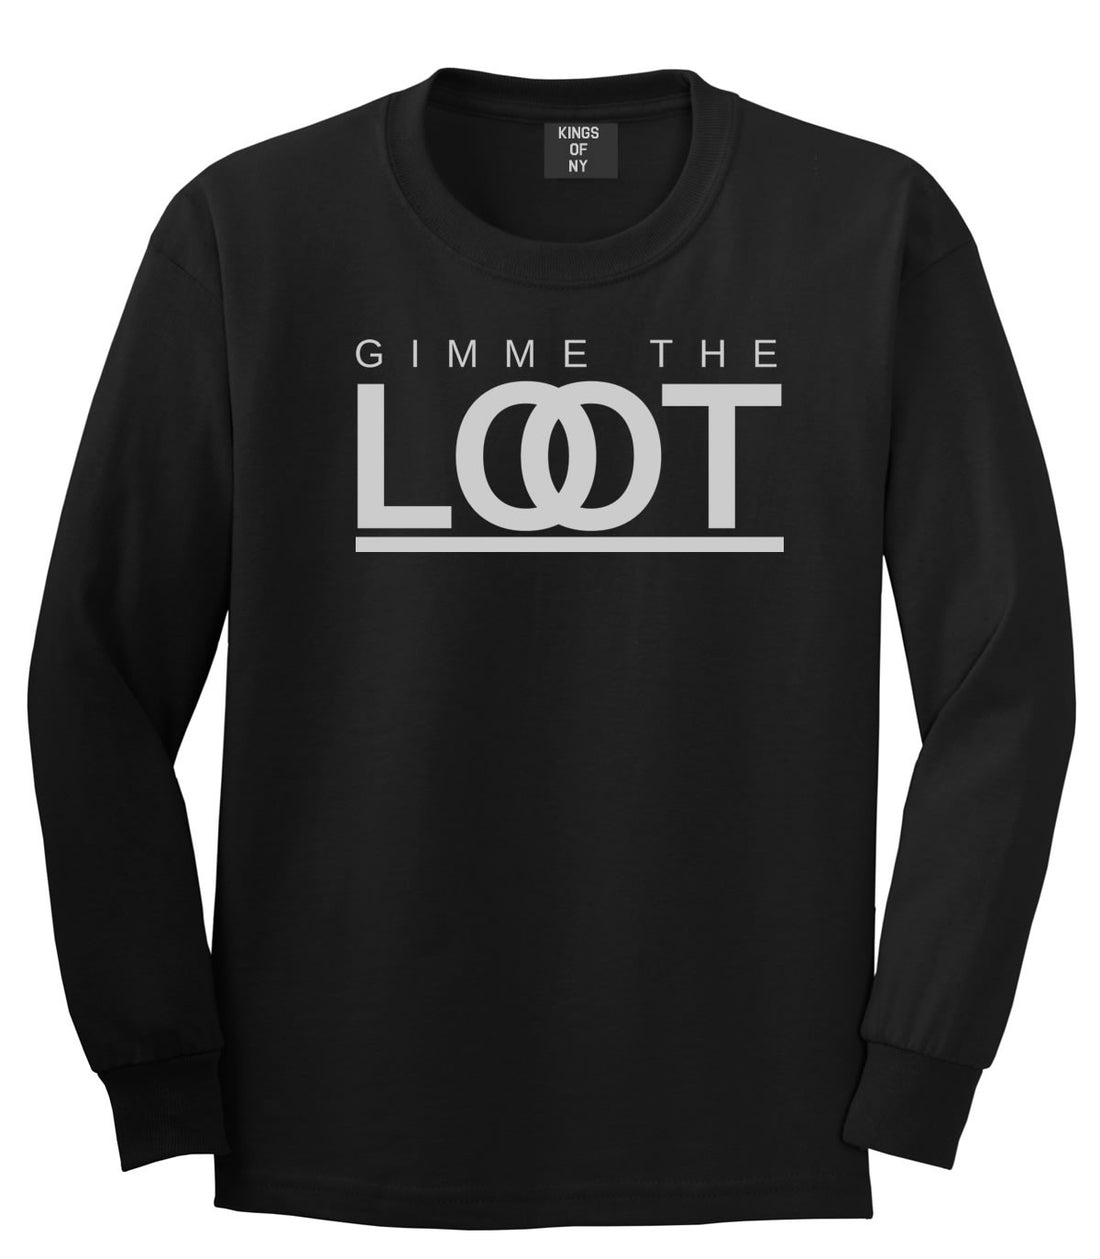 Gimme The Loot  Long Sleeve T-Shirt in Black By Kings Of NY